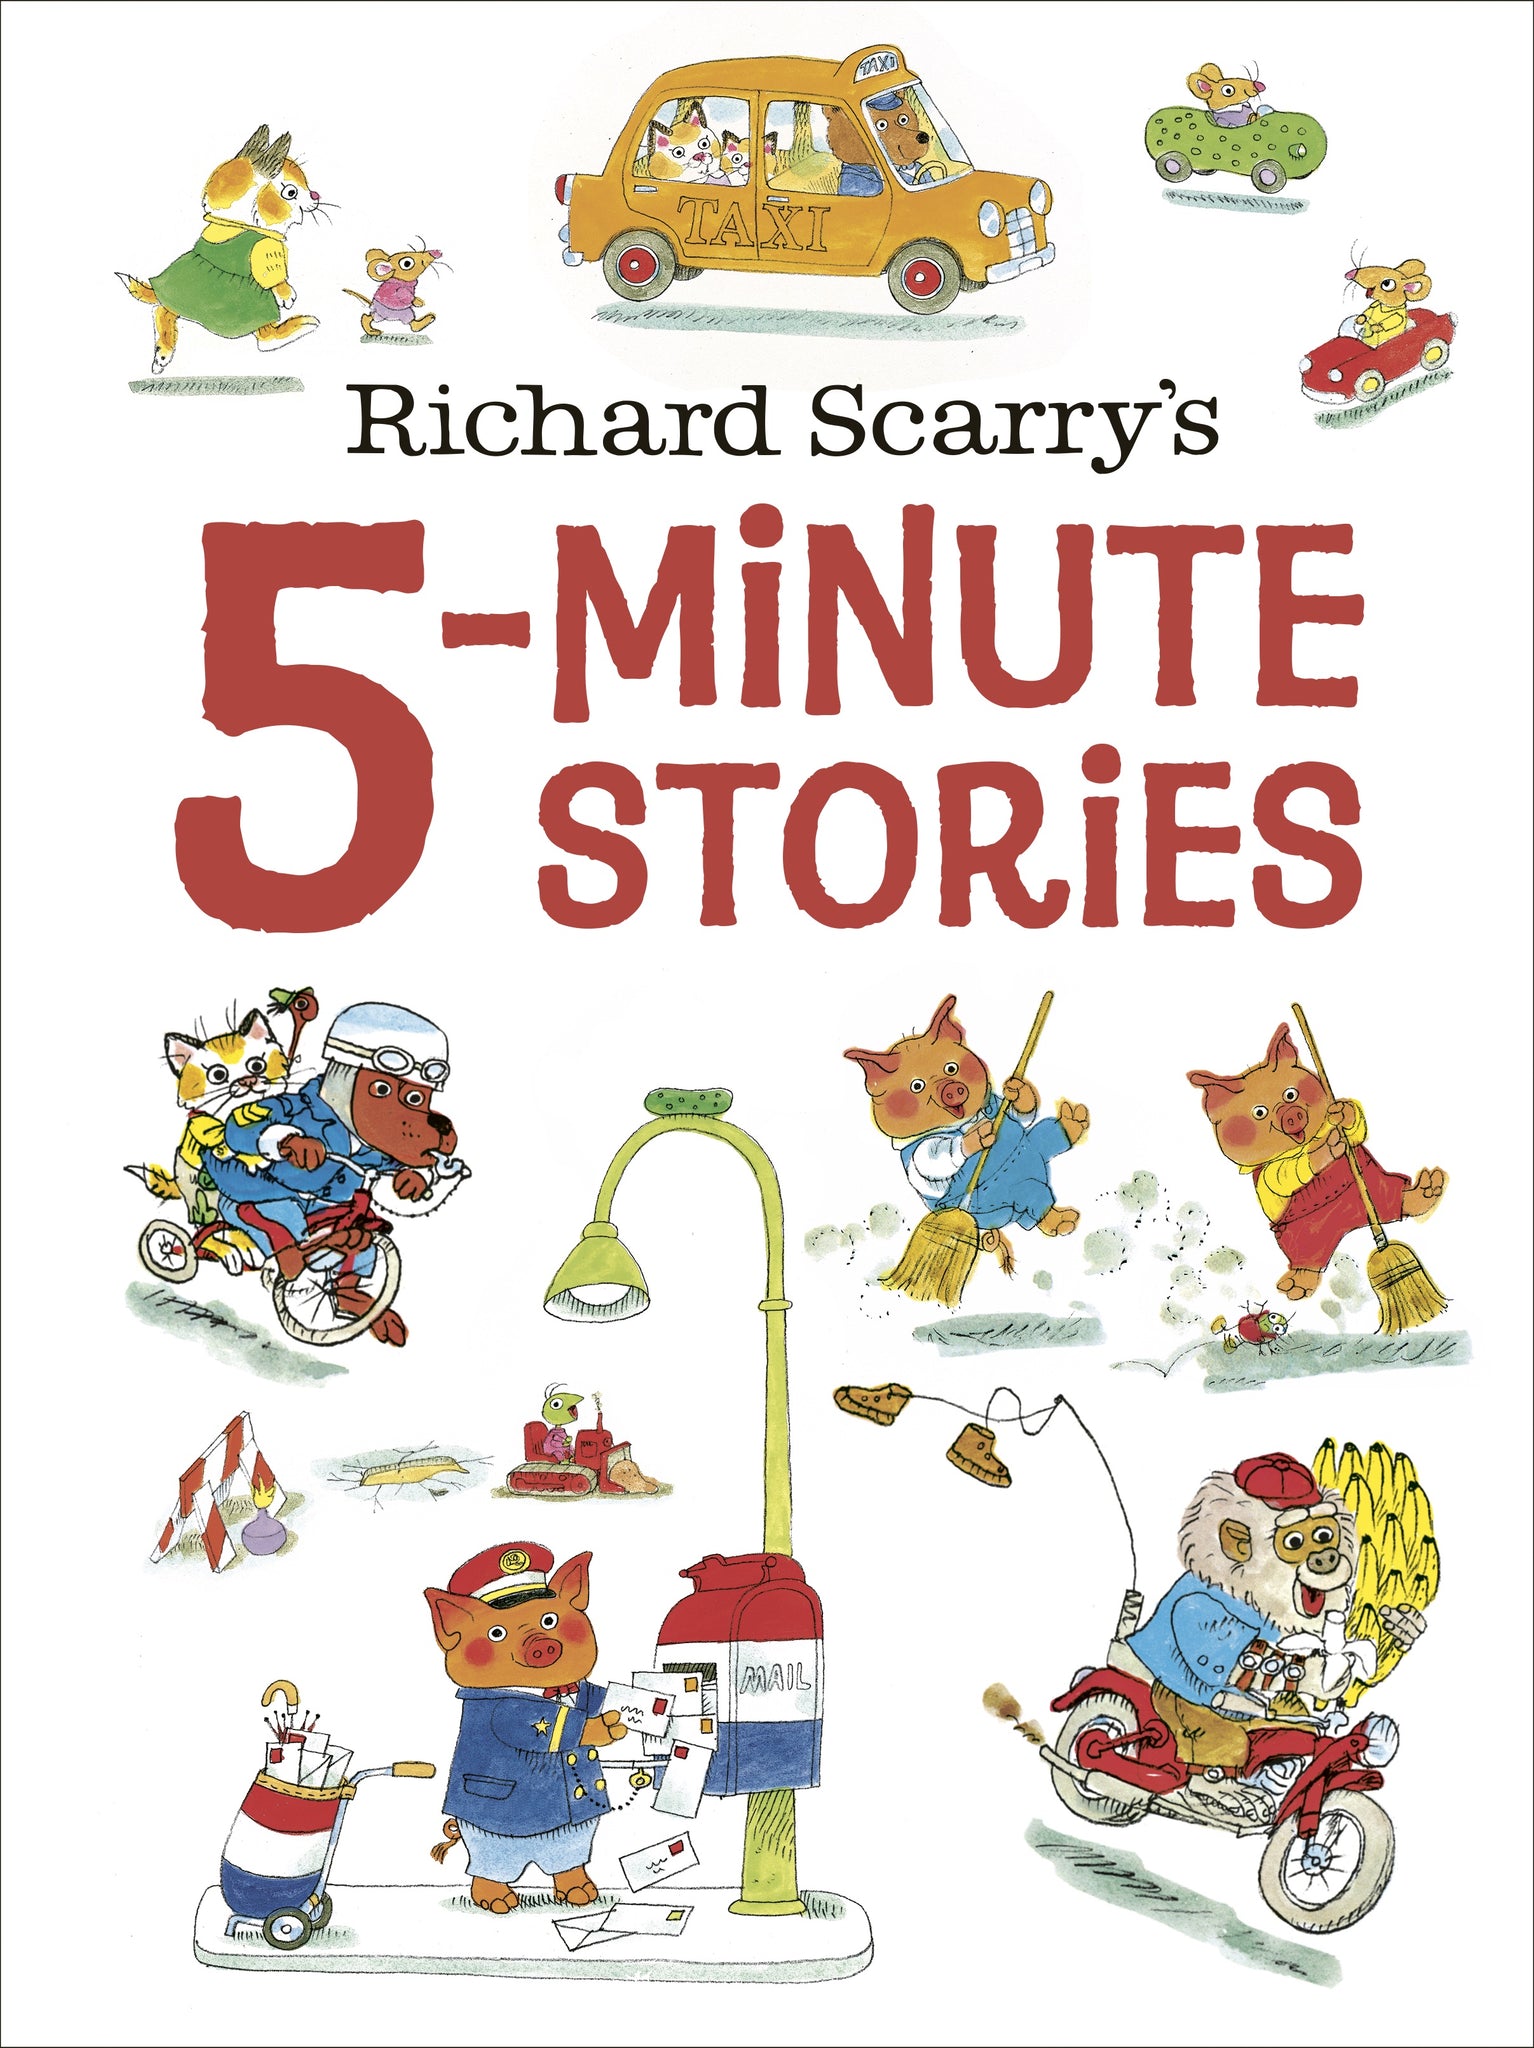 richard scarry's 5-minute stories